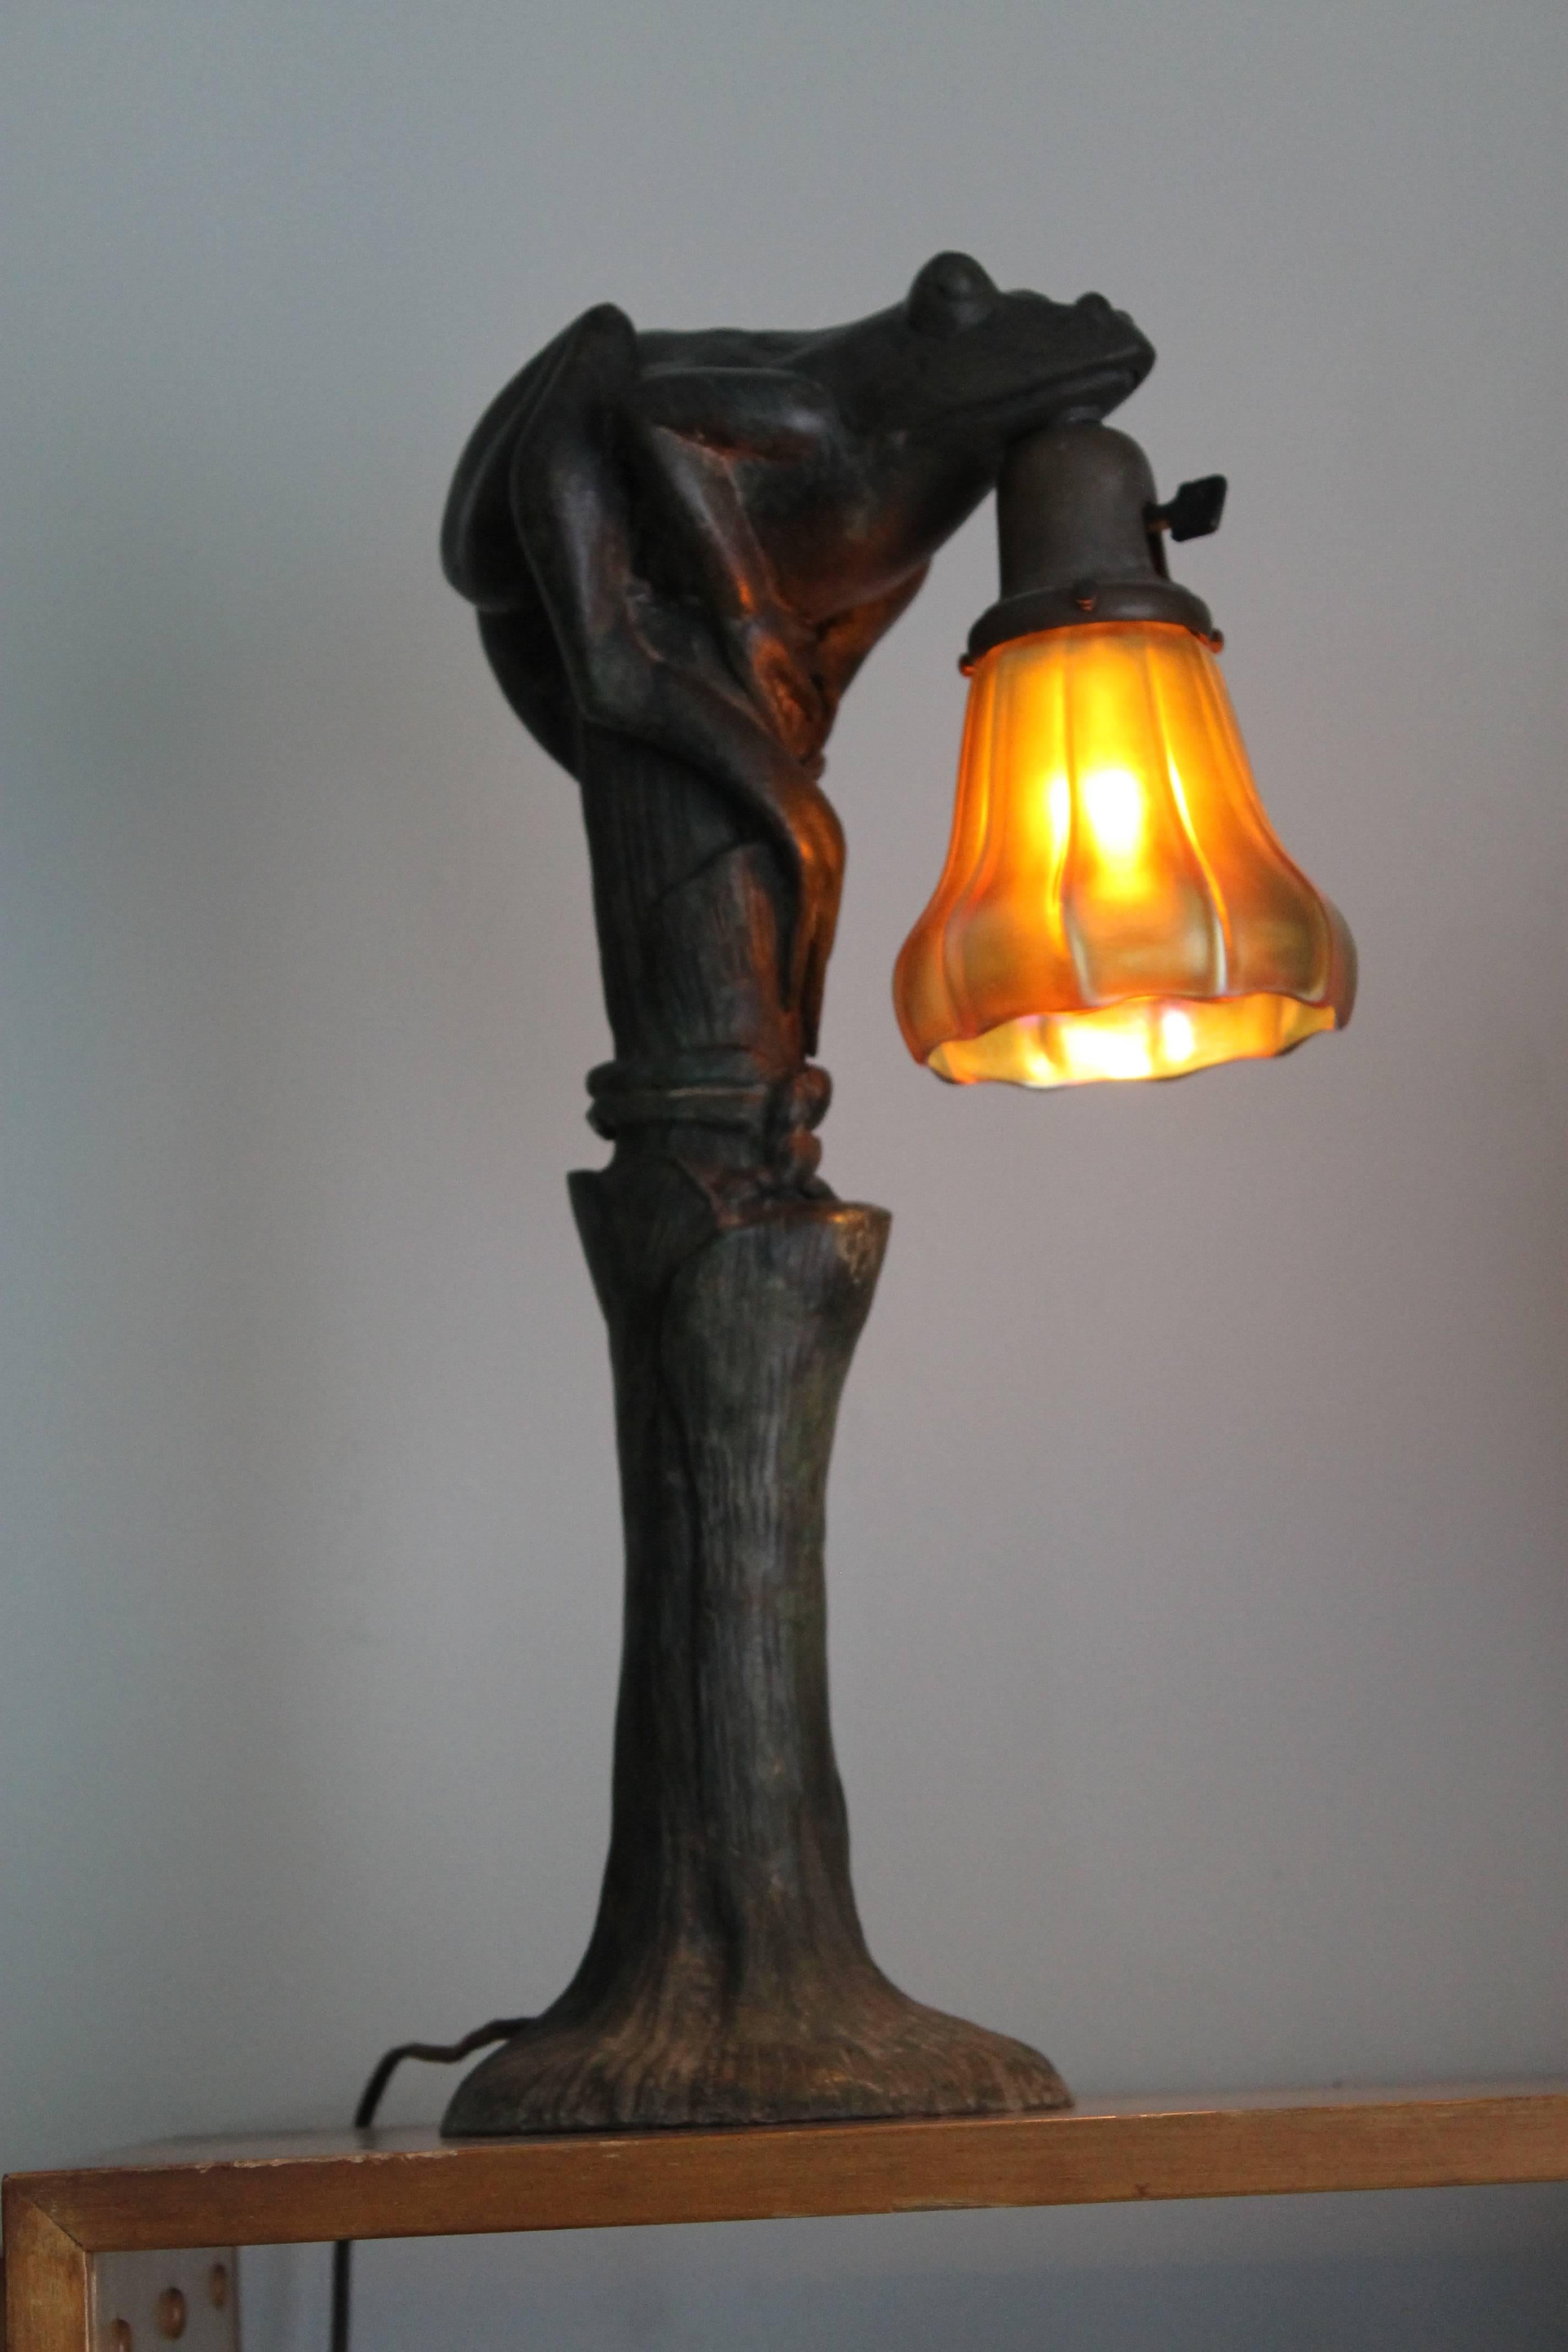 Art Nouveau figural bronze frog lamp with Steuben shade. A circa early 1900's cast bronze frog lamp fitted with a signed Steuben Aurene glass blossom shaped shade. The lamp stands 20" tall. The Steuben shade is 5"long and 5" wide.